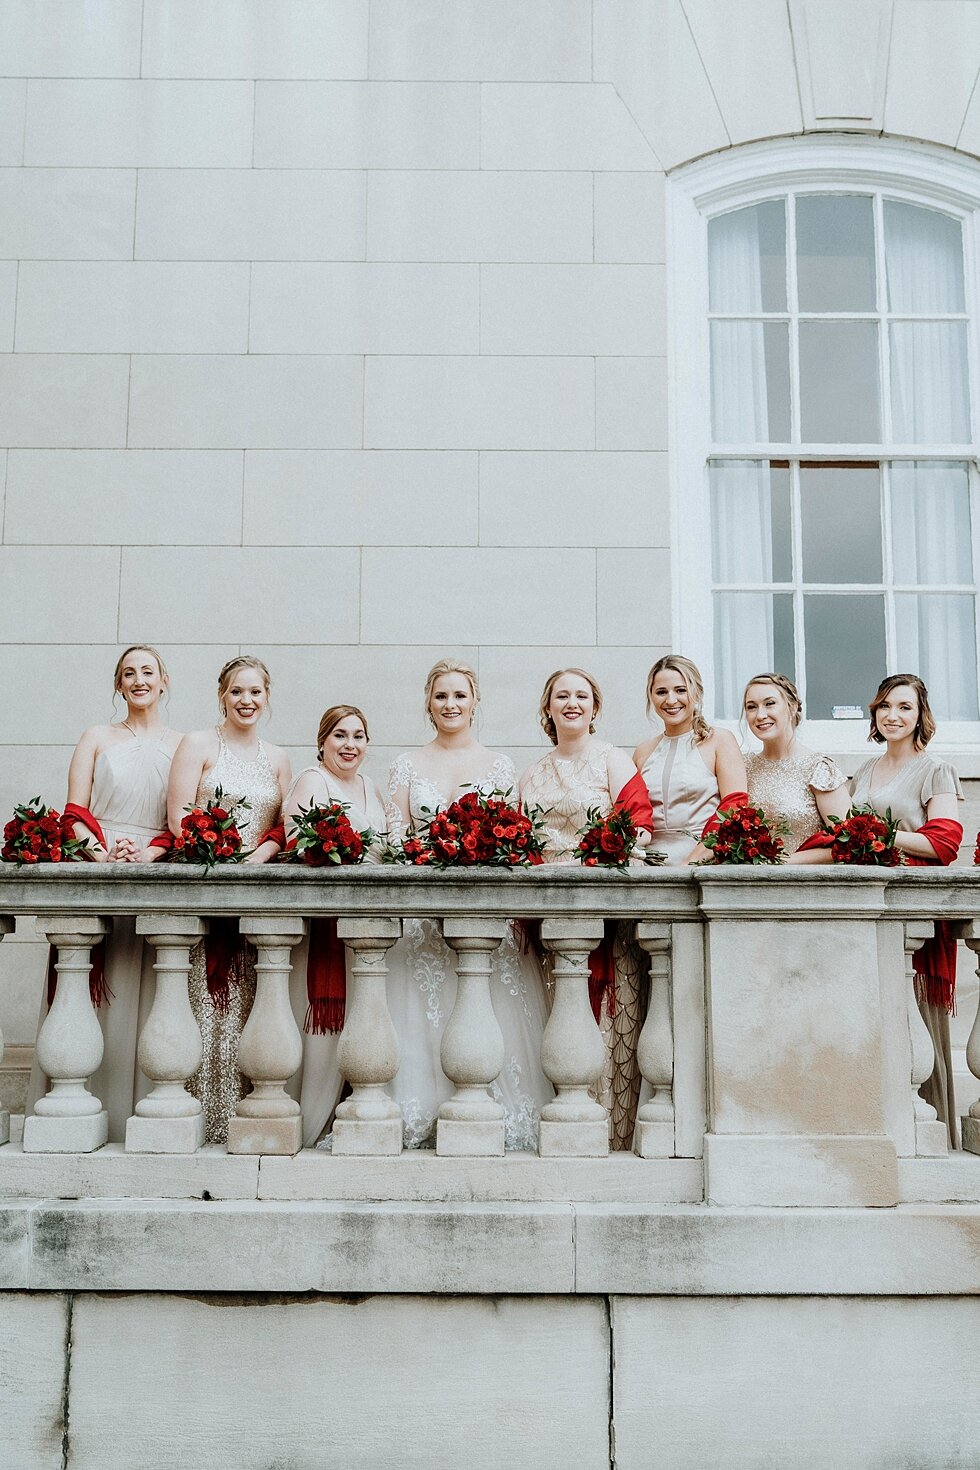  Wedding portraits of the bridal party on the balcony with the gorgeous bride on her wedding day at the Pendennis Club in Lousiville, Kentucky. Brisk February winter wedding Pendennis Club Louisville, Kentucky southern wedding bride and groom carefre